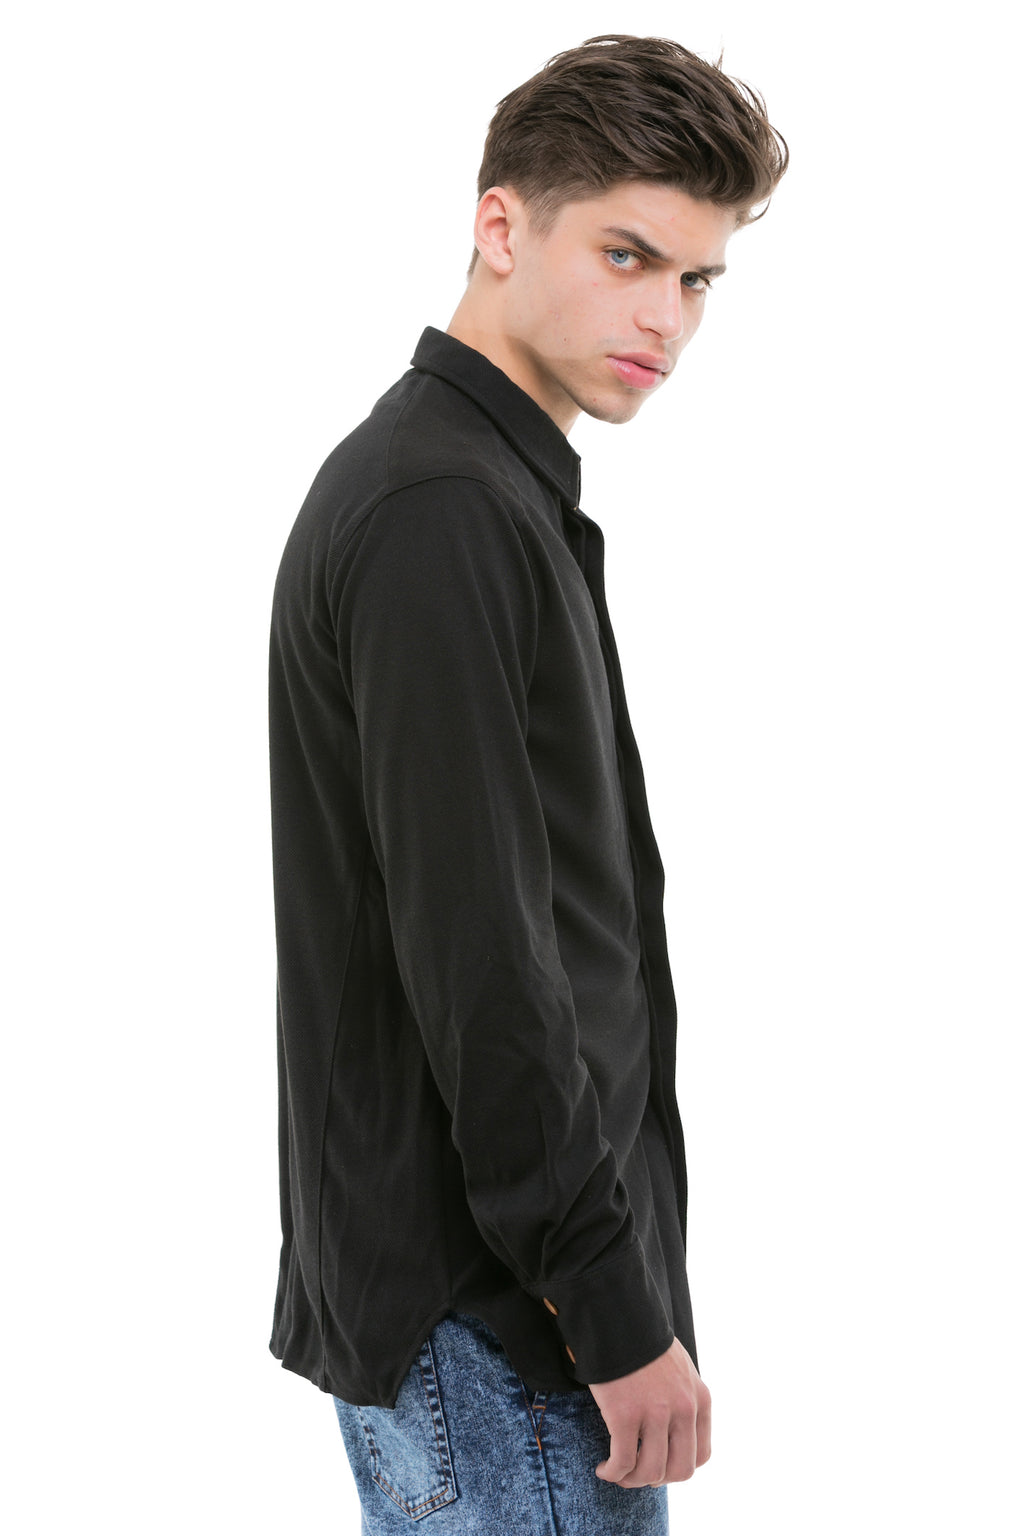 Black Japanese Shirt With Heavy Cotton Blend - Side View